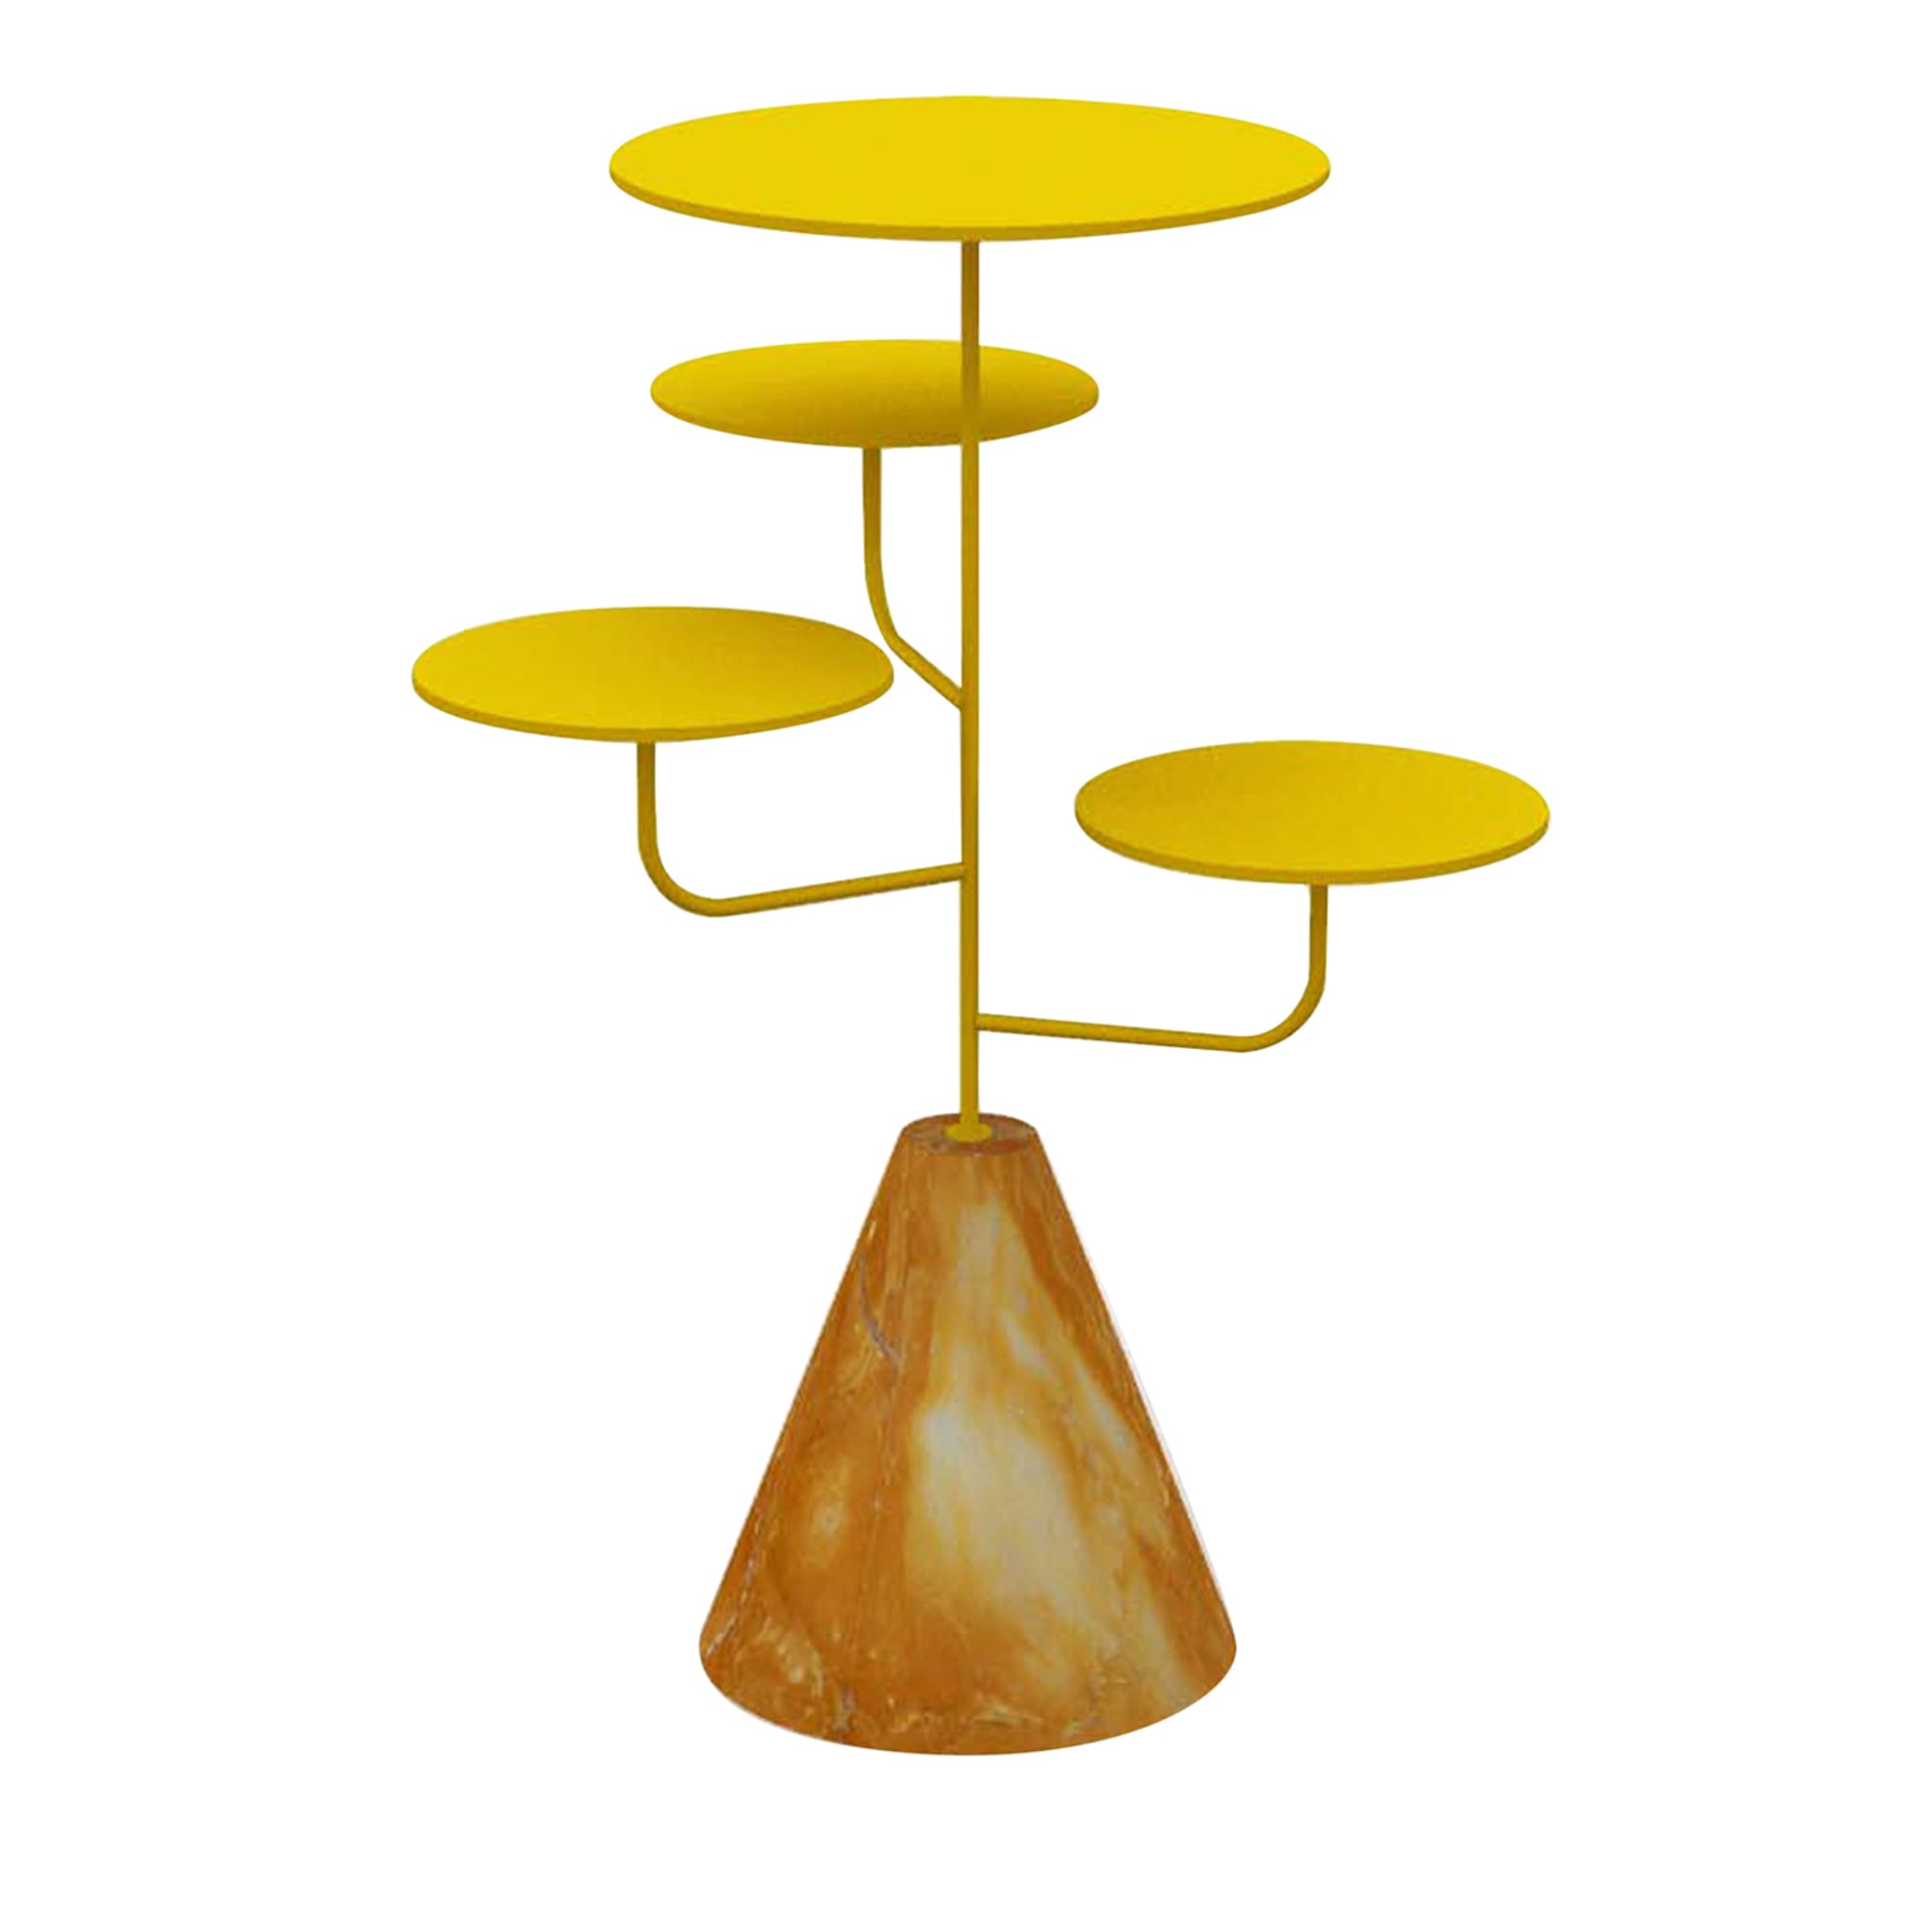 Condiviso 4-Tier Yellow/Giallo Siena Serving Stand - Main view